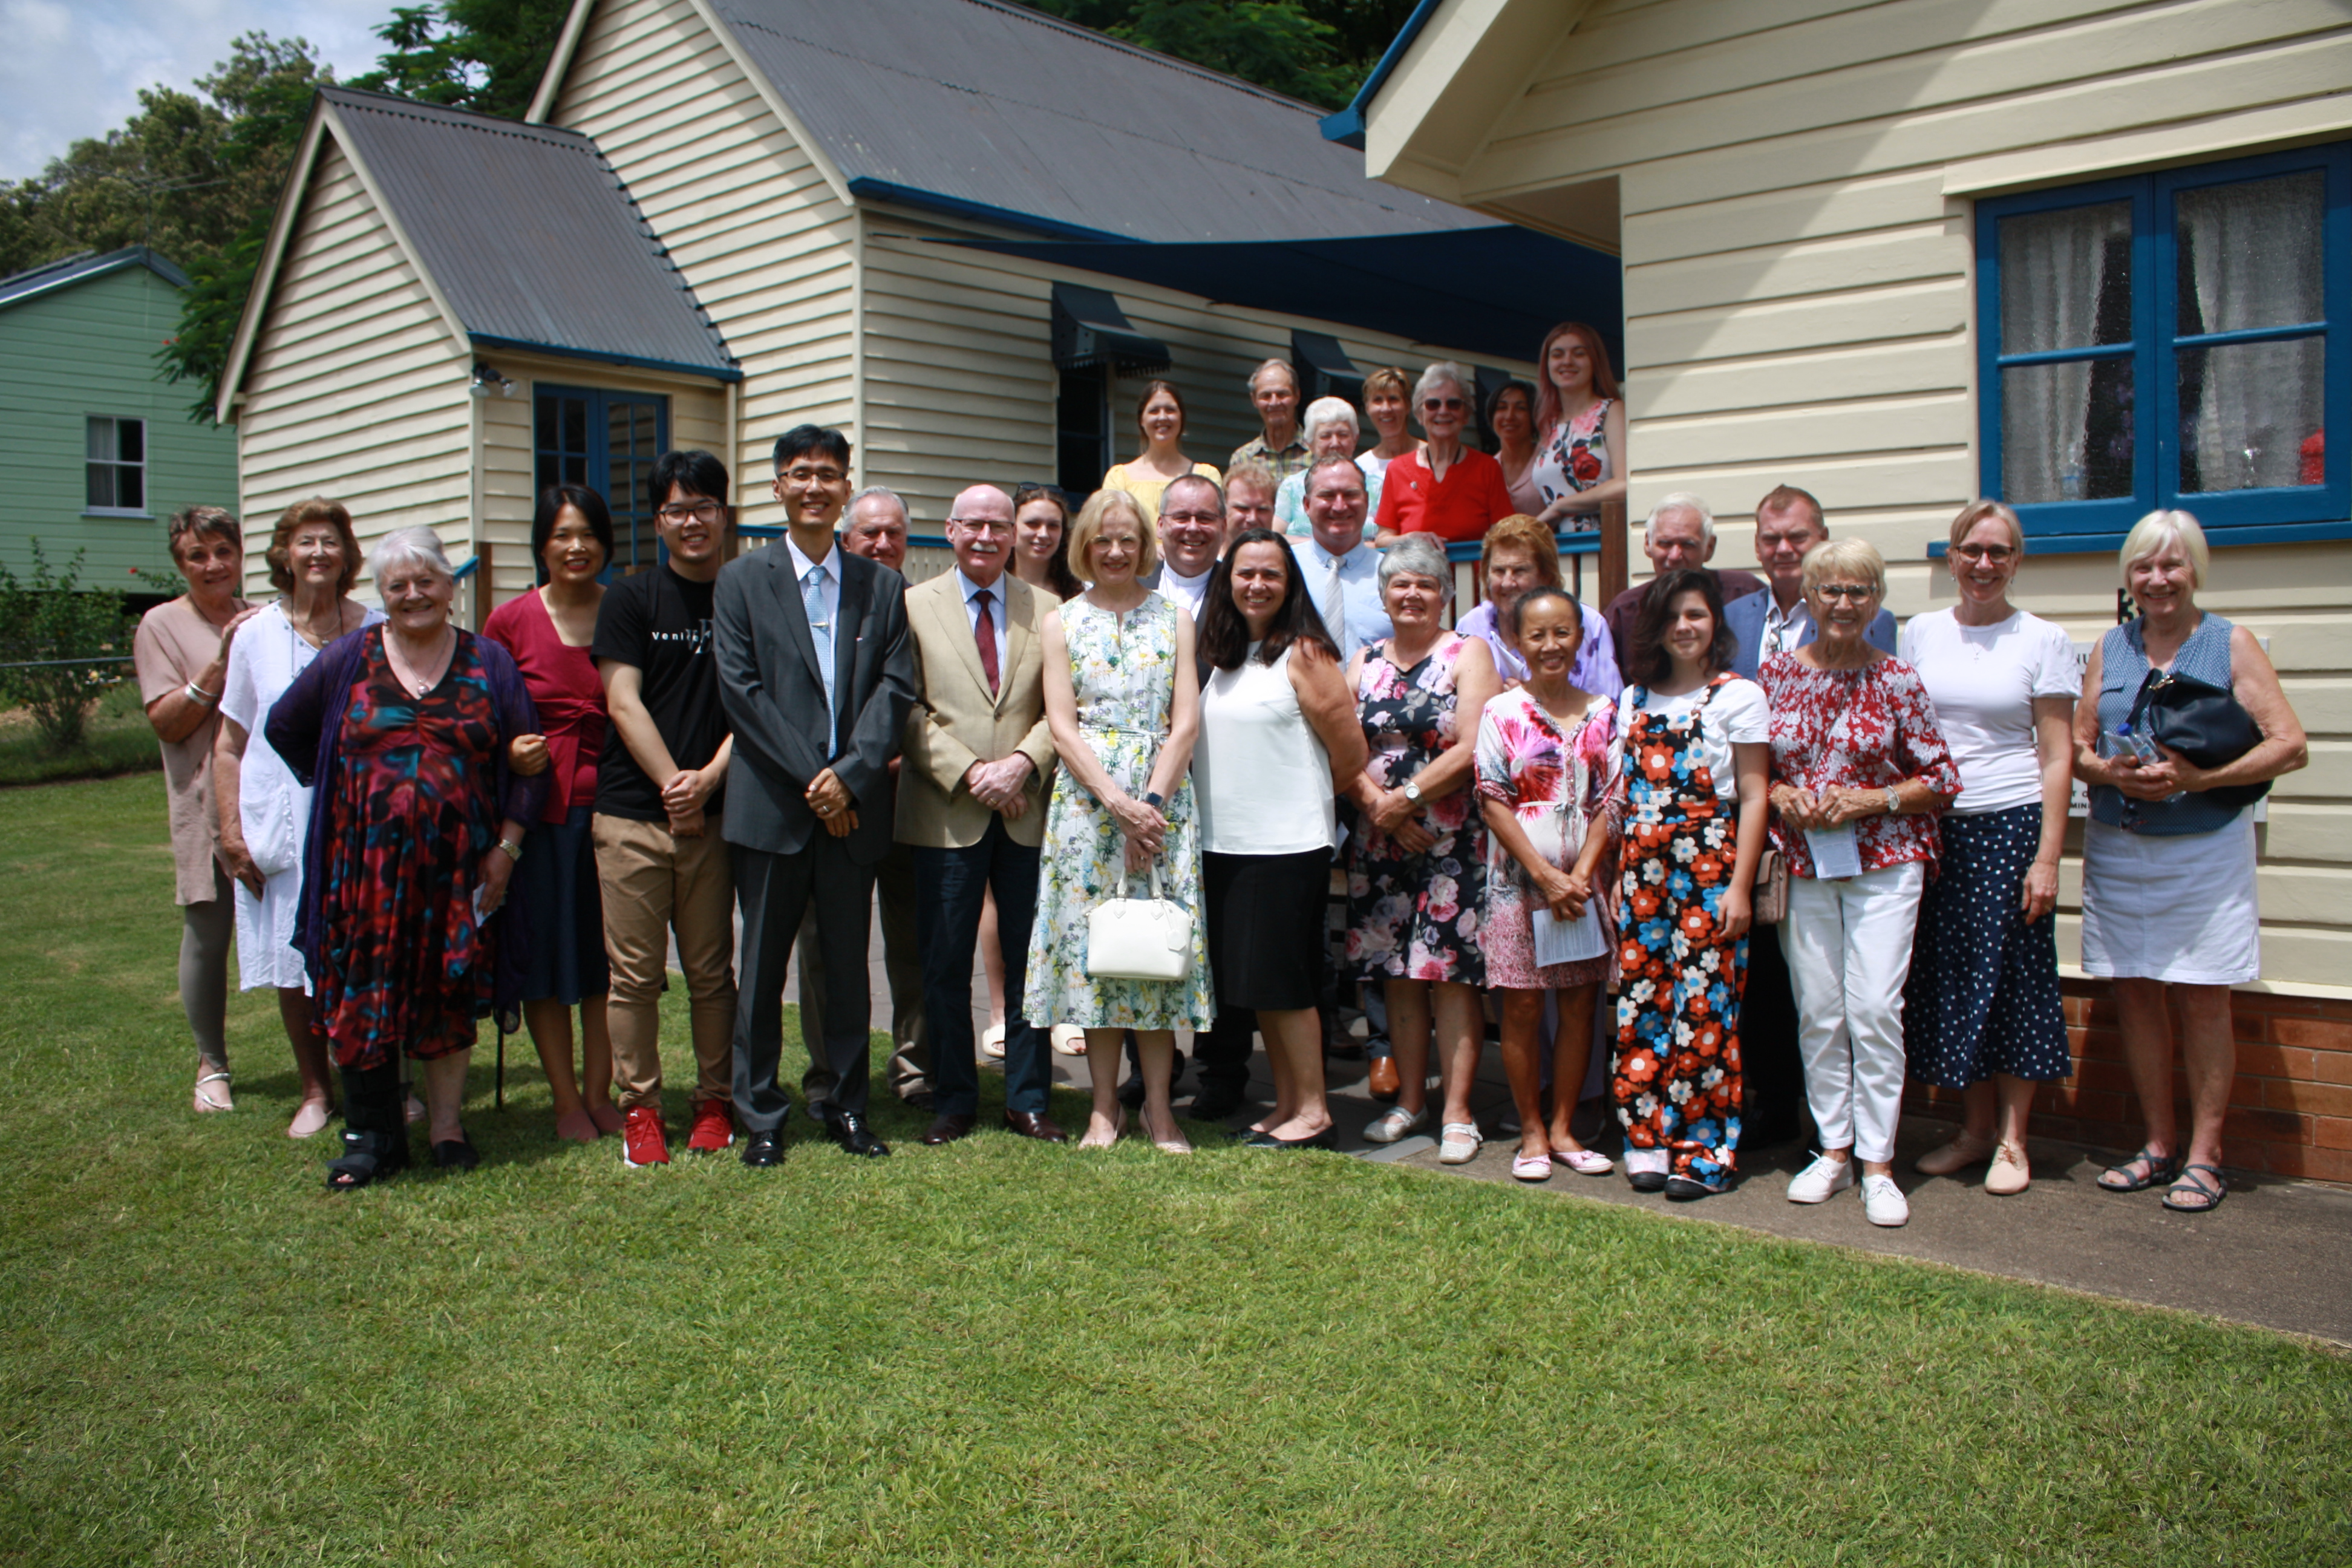 Her Excellency, the Honourable Dr Jeannette Young AC PSM with her husband Professor Graeme Nimmo with members of the Scenic Rim Uniting Church congregation